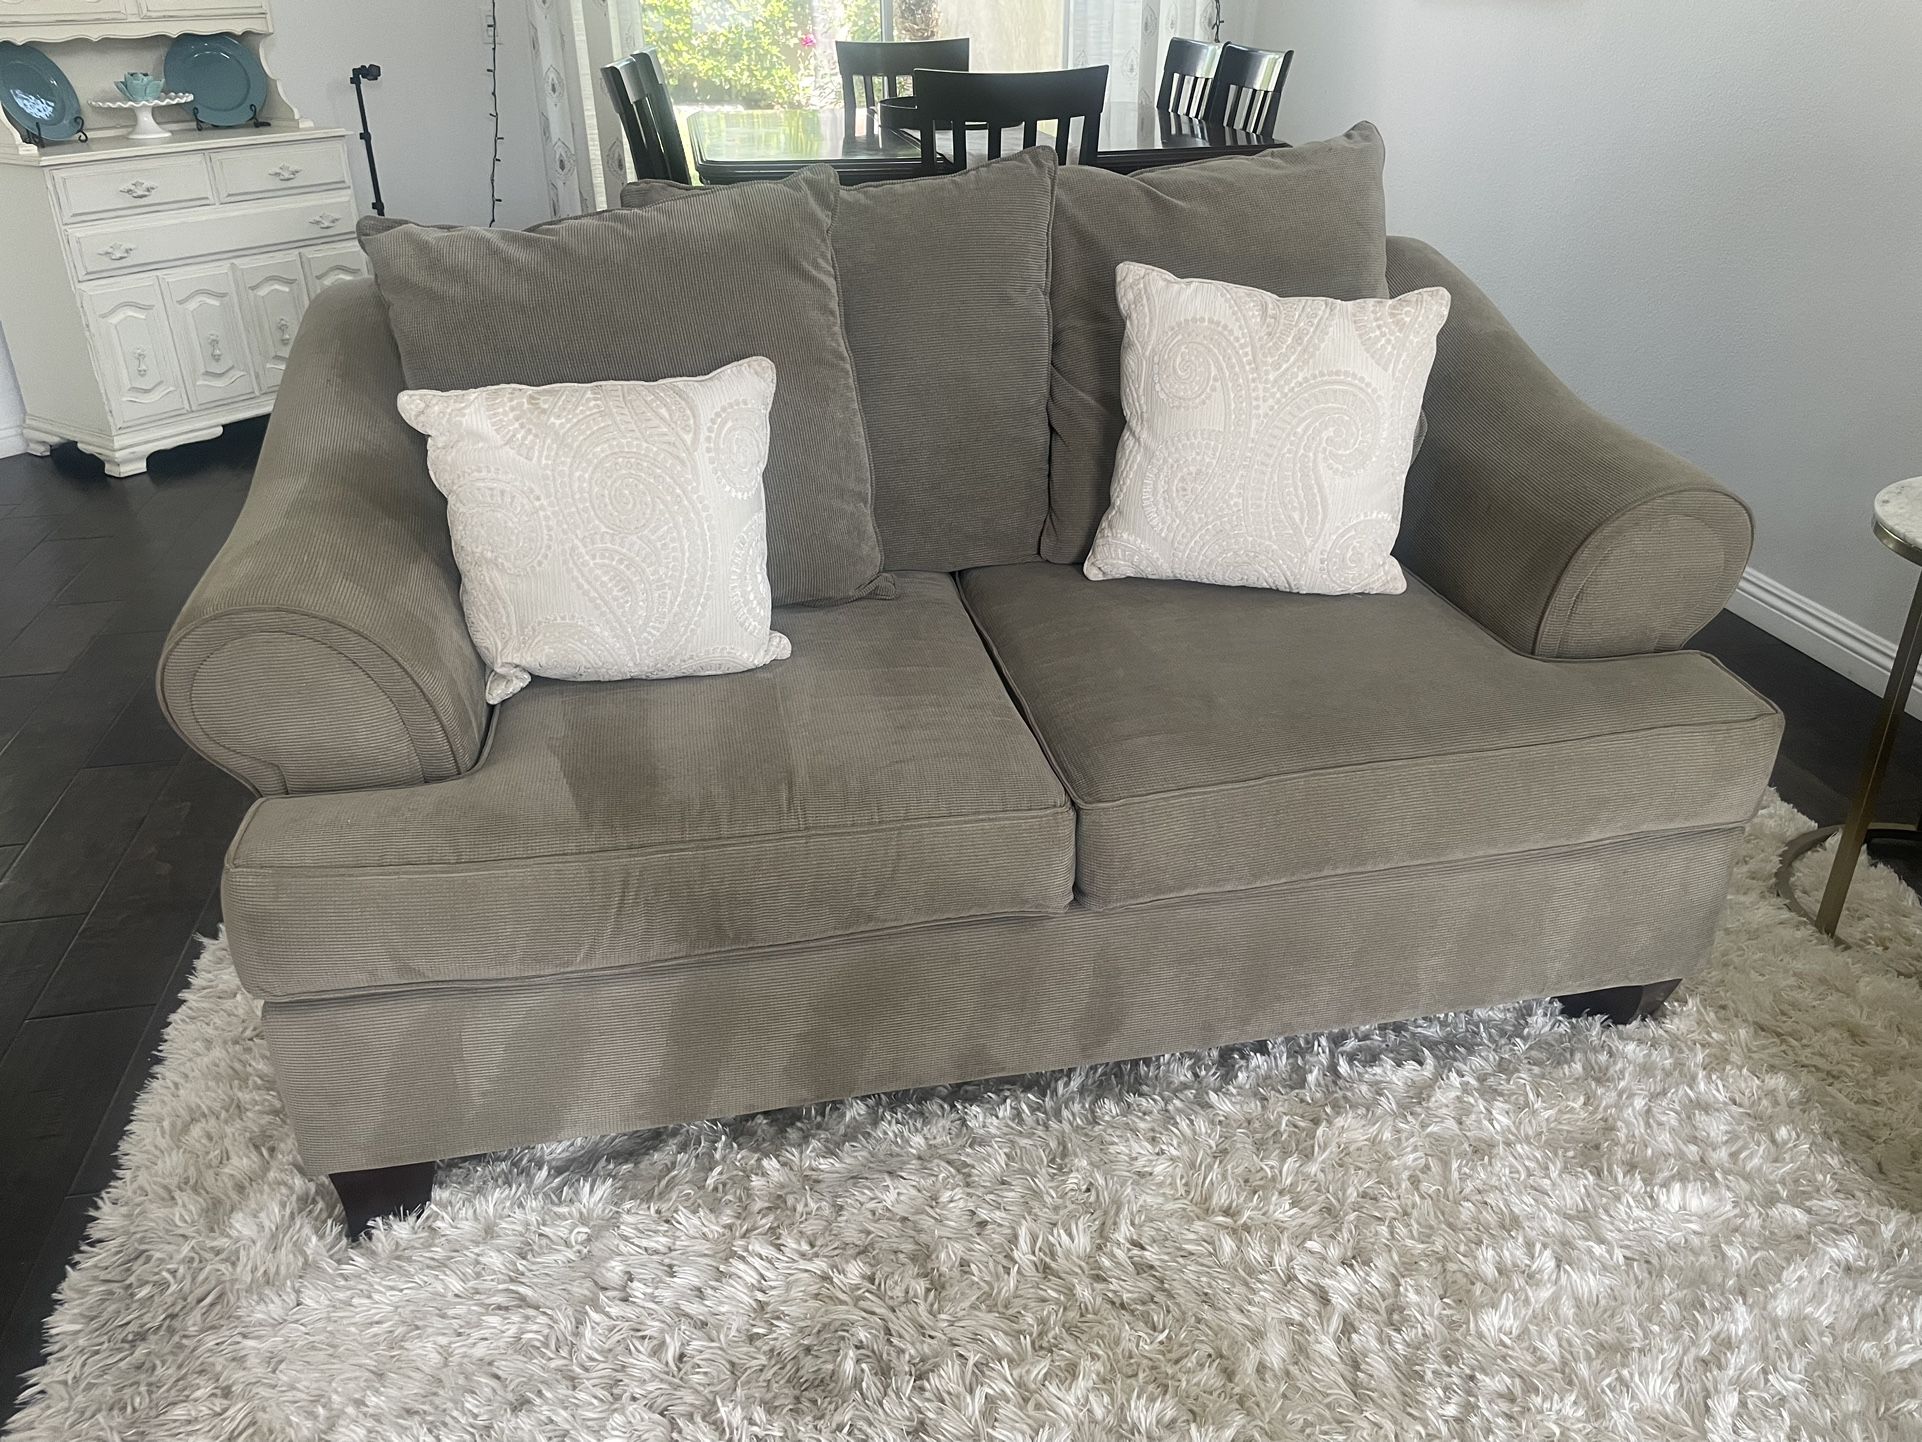 Couch/Sofa For $150